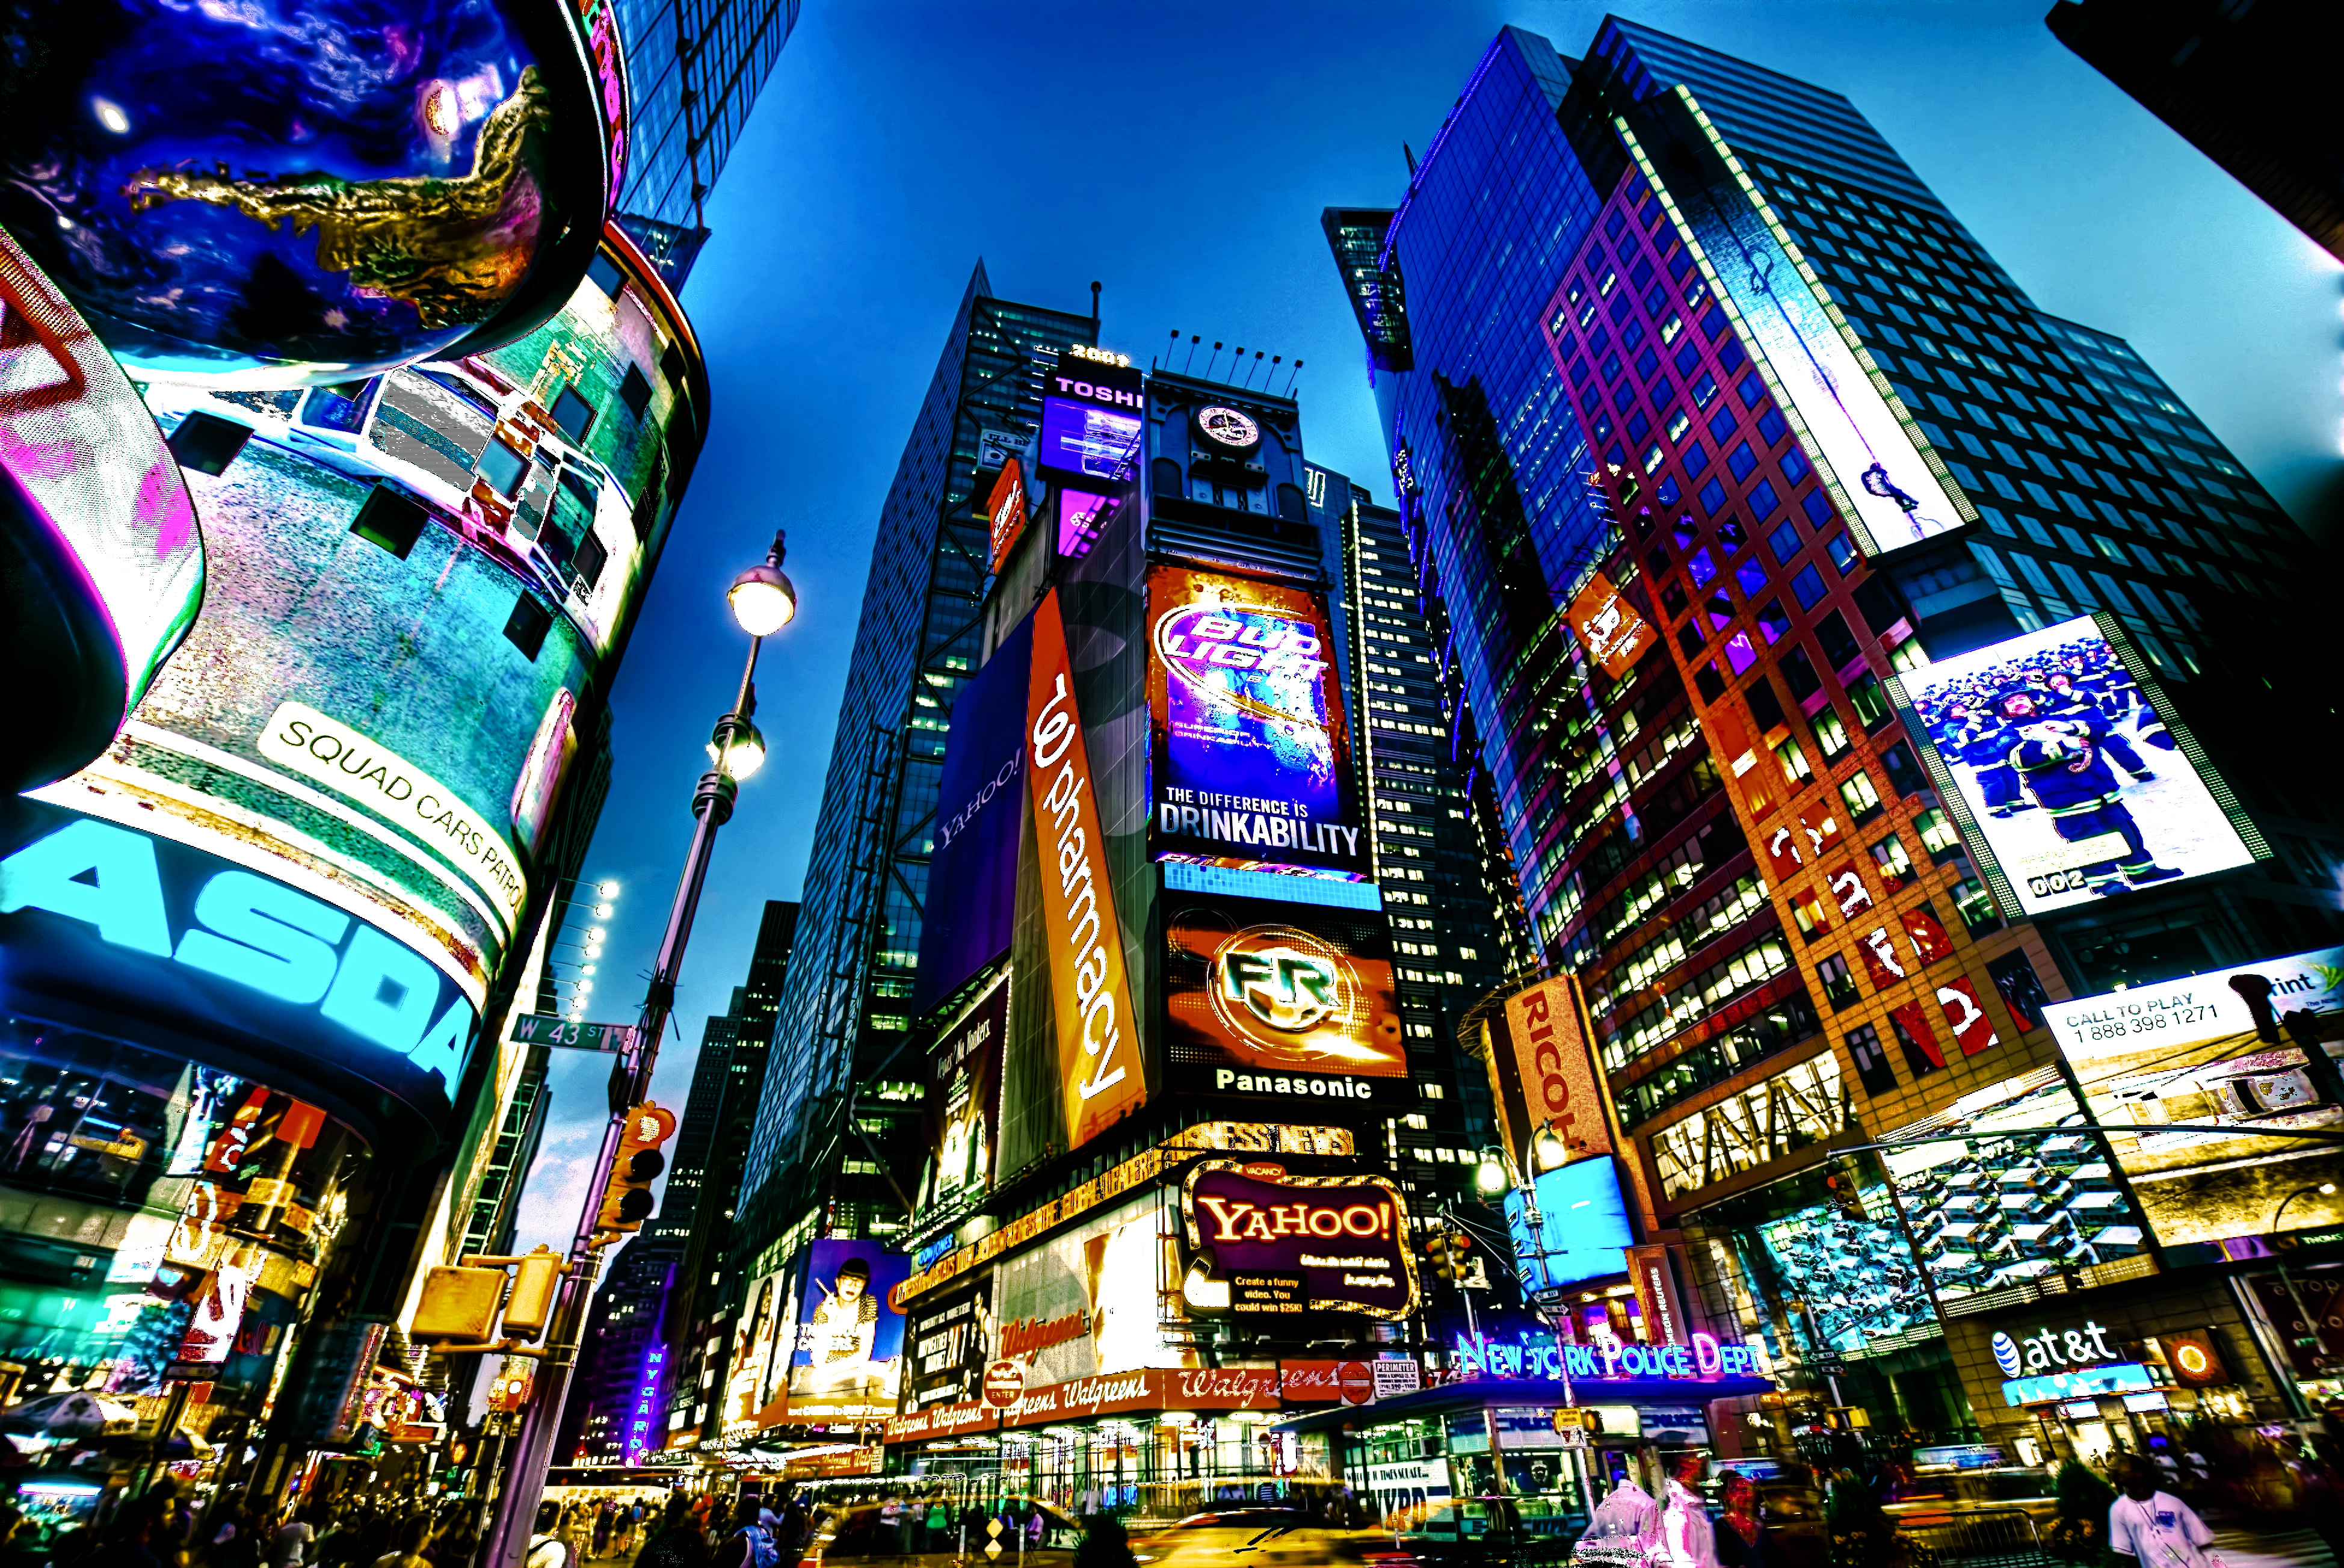 File:Times Square, New York City (HDR).jpg - Wikimedia Commons